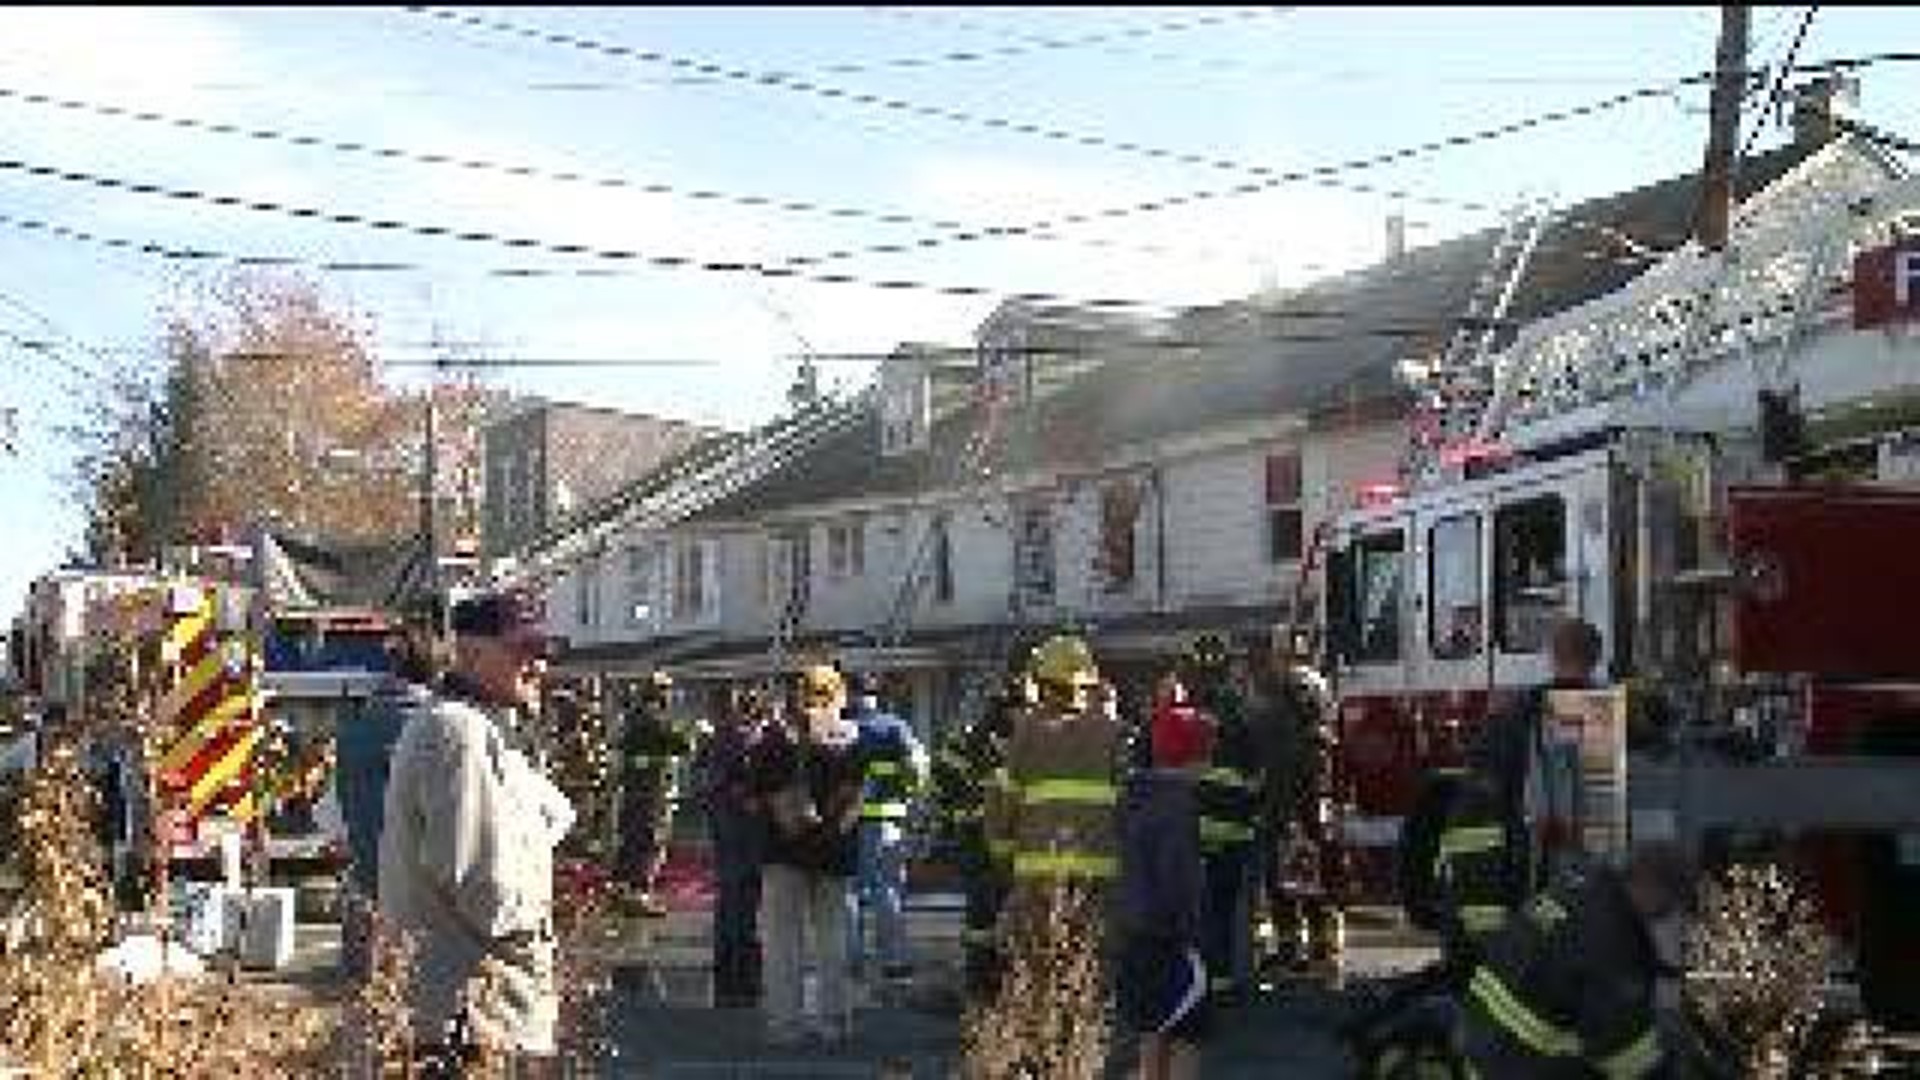 Fire Sparks Questions About Building Conditions